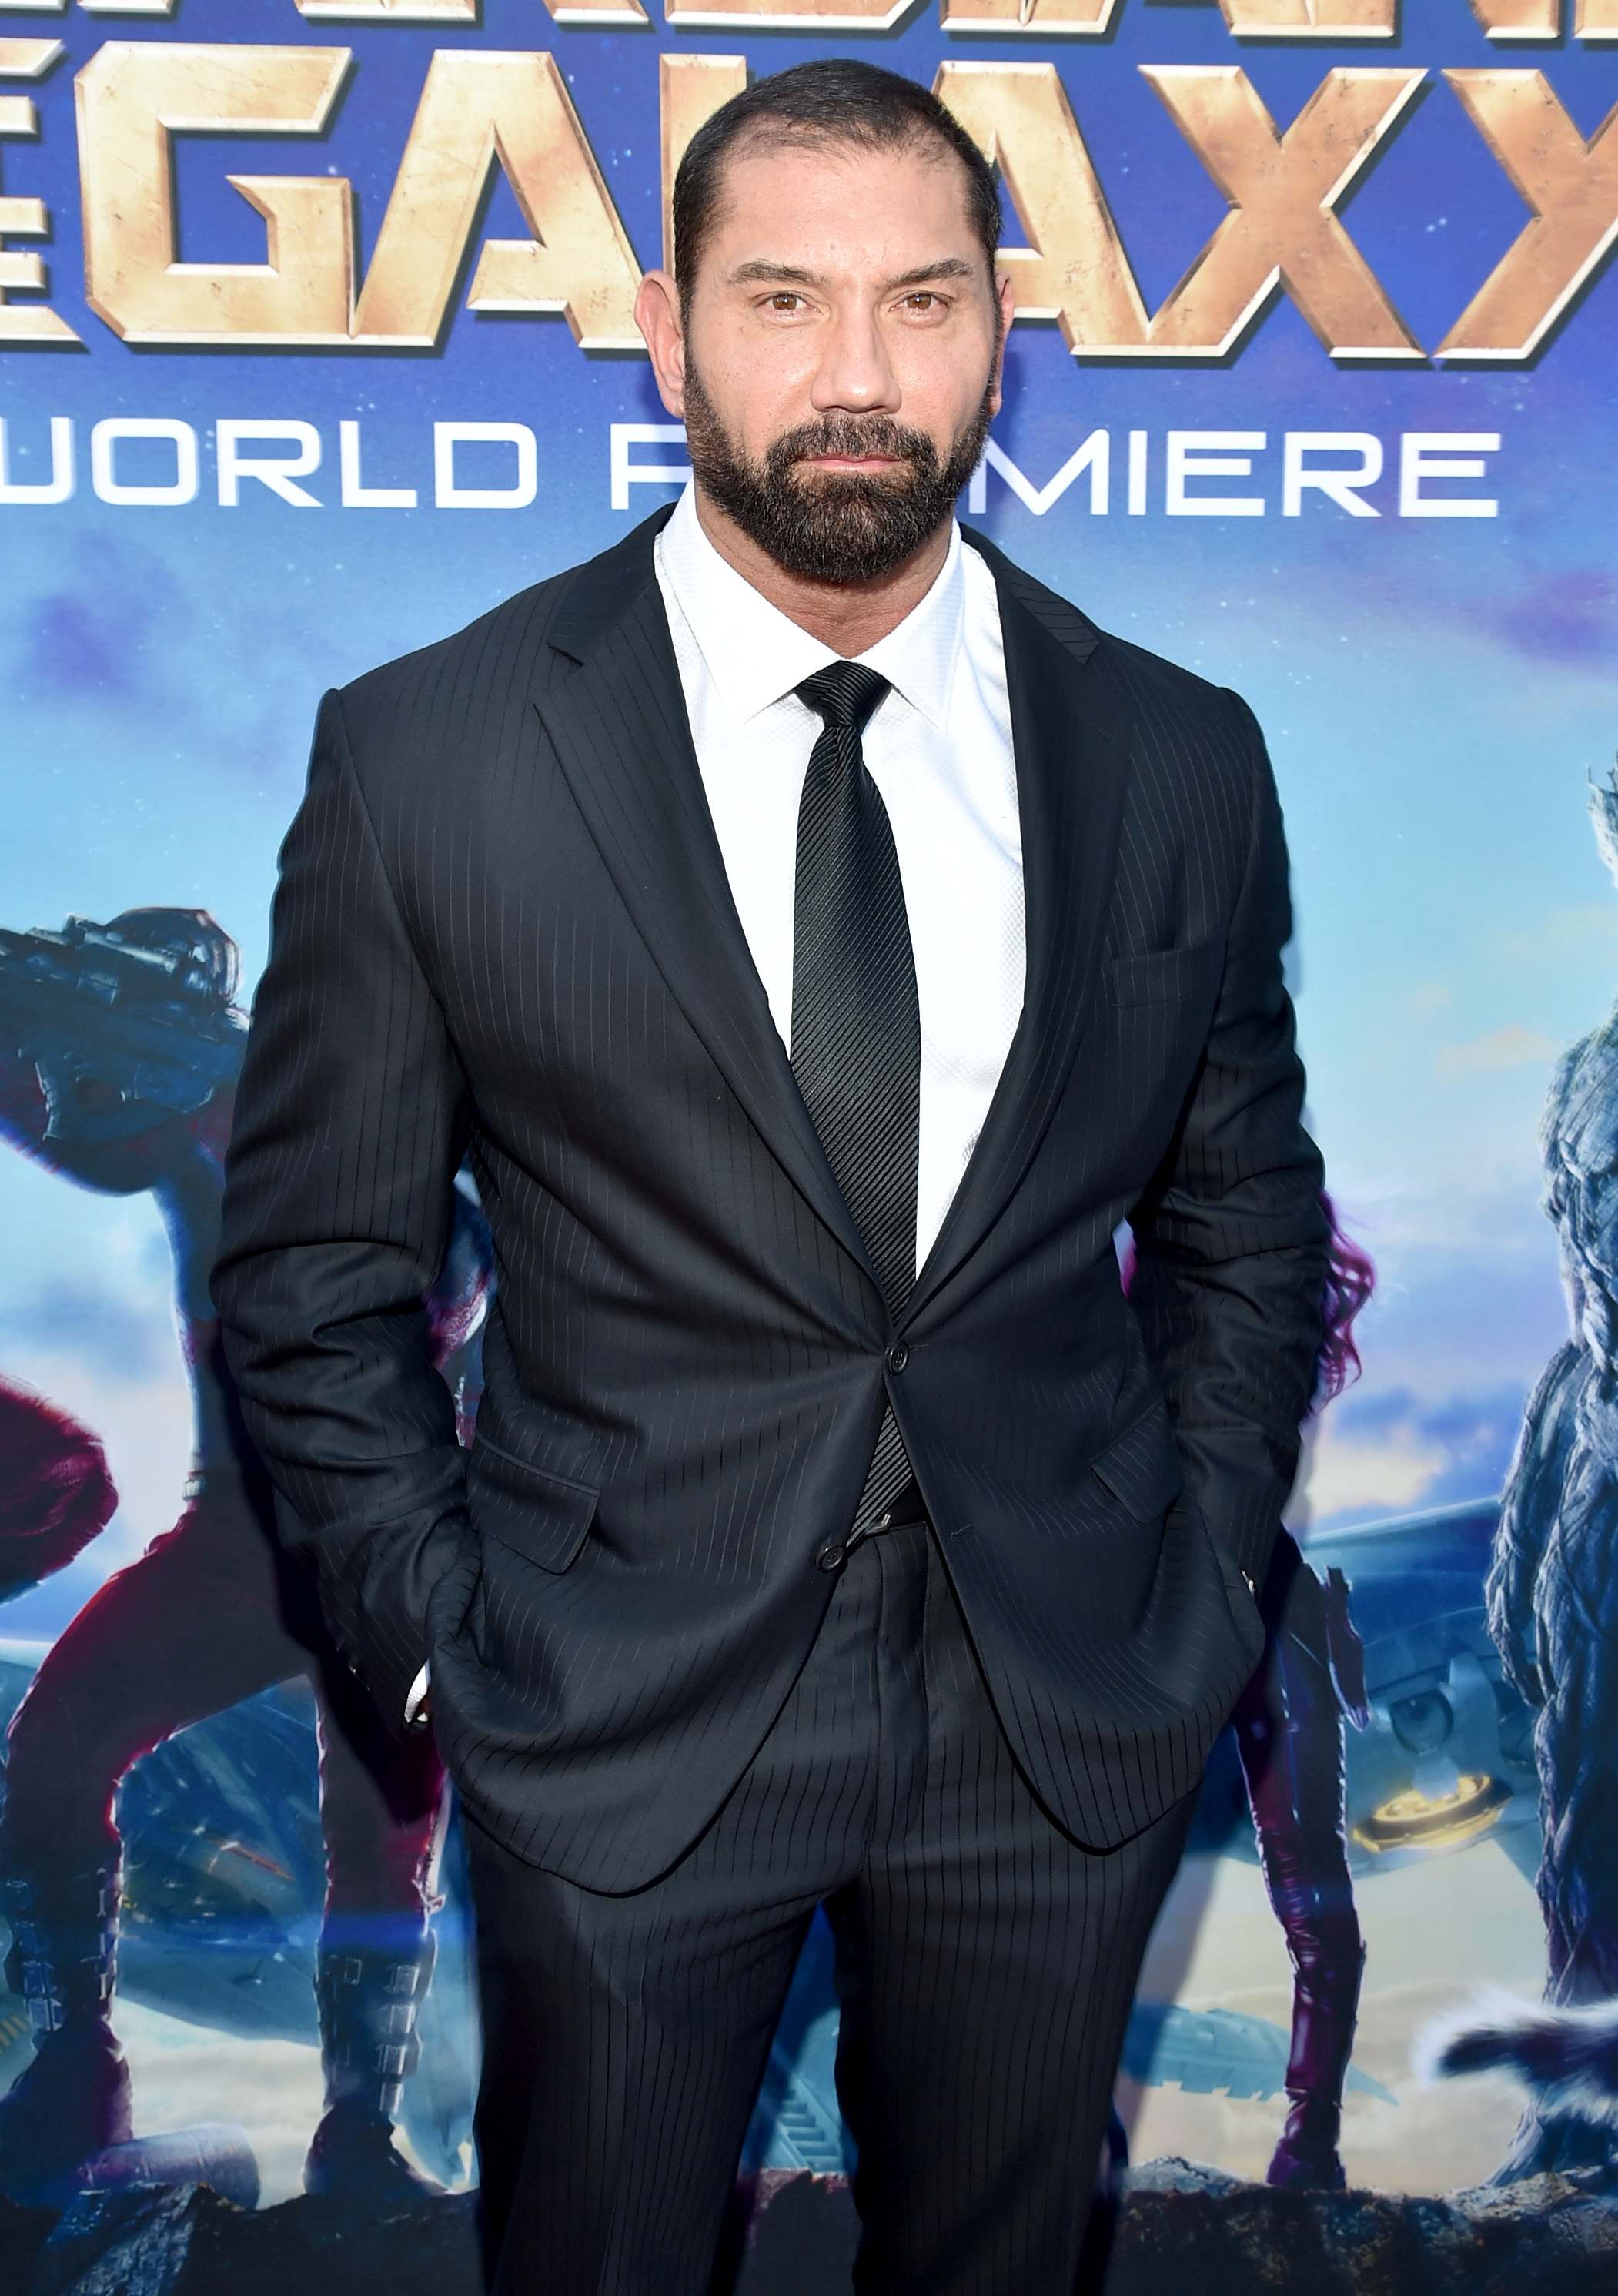 attends the after party for The World Premiere of MarvelÂs epic space adventure ÂGuardians of the Galaxy,Â directed by James Gunn and presented in Dolby 3D and Dolby Atmos at the Dolby Theatre. July 21, 2014 Hollywood, CA